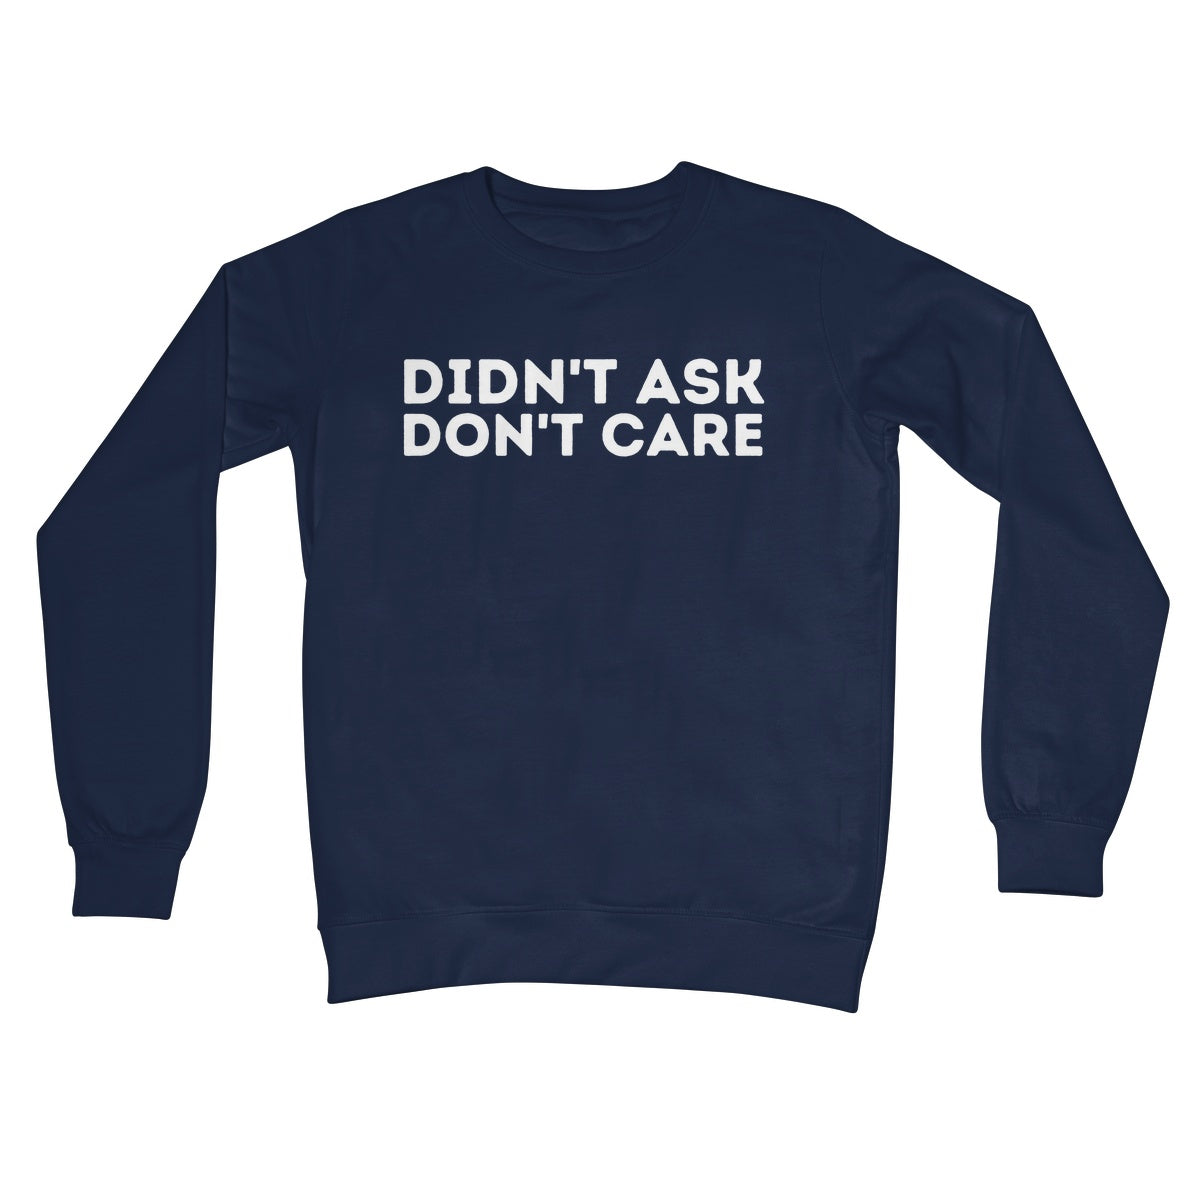 didn't ask don't care jumper navy